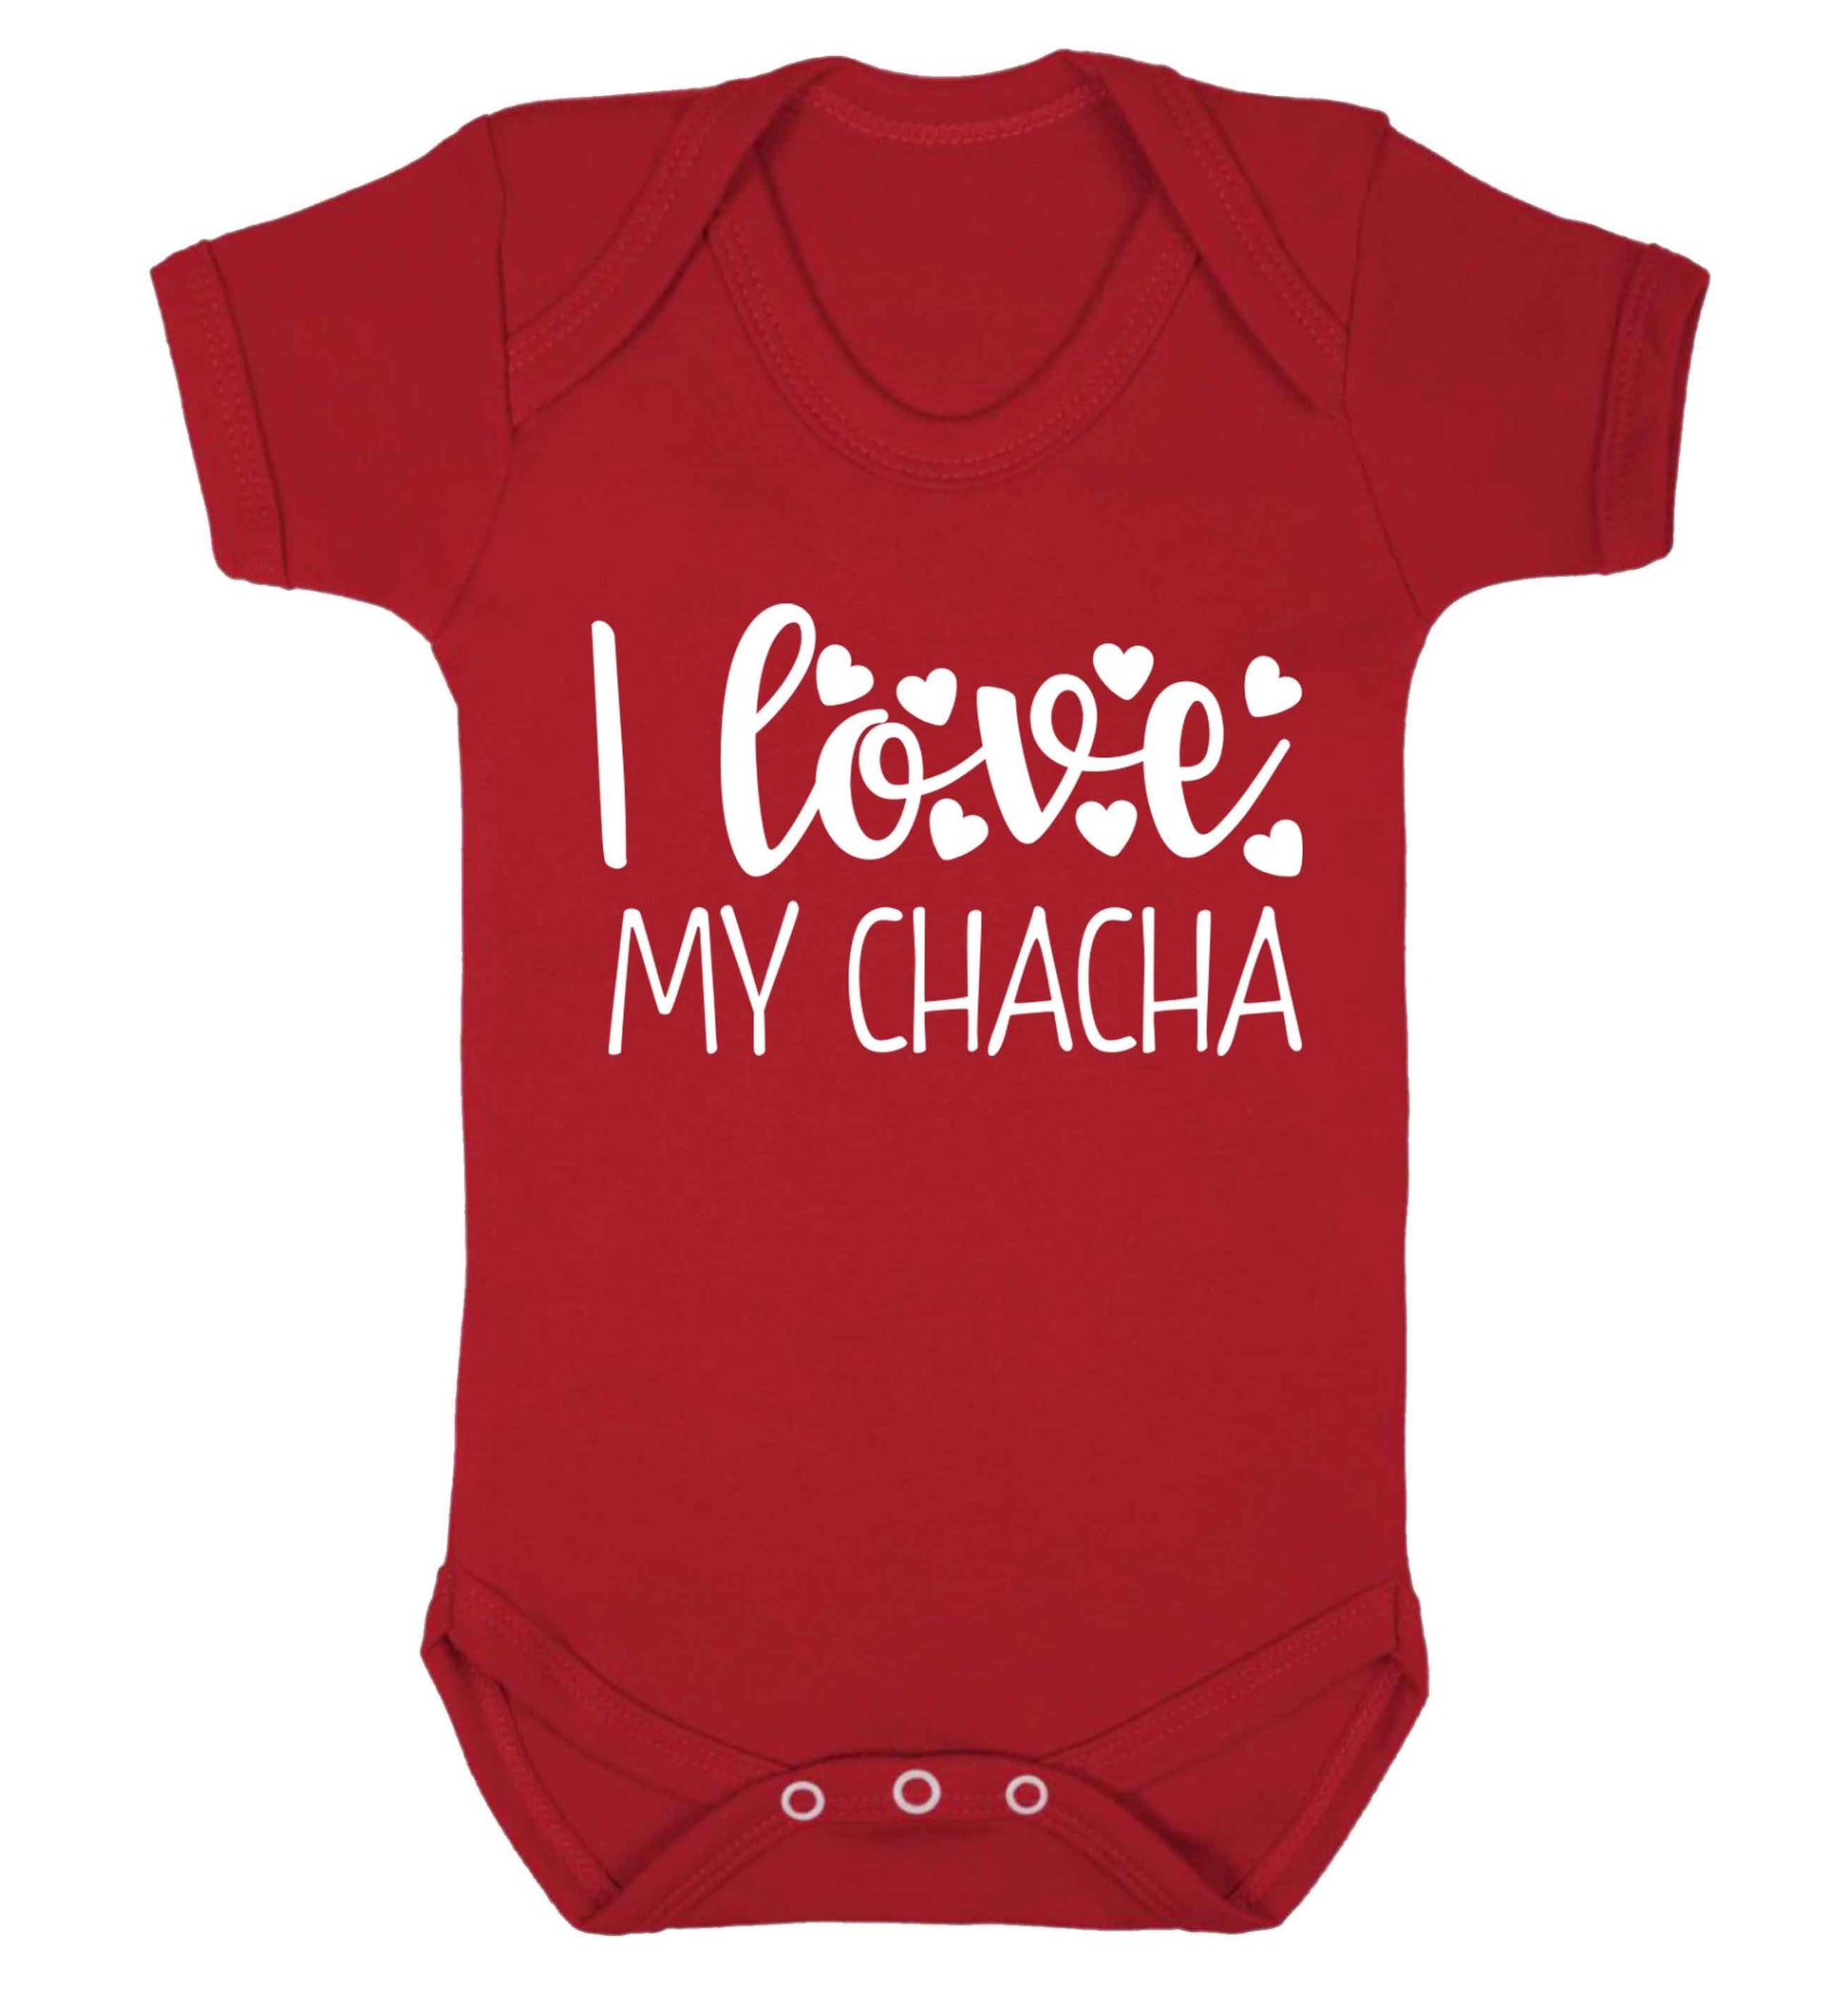 I love my chacha Baby Vest red 18-24 months